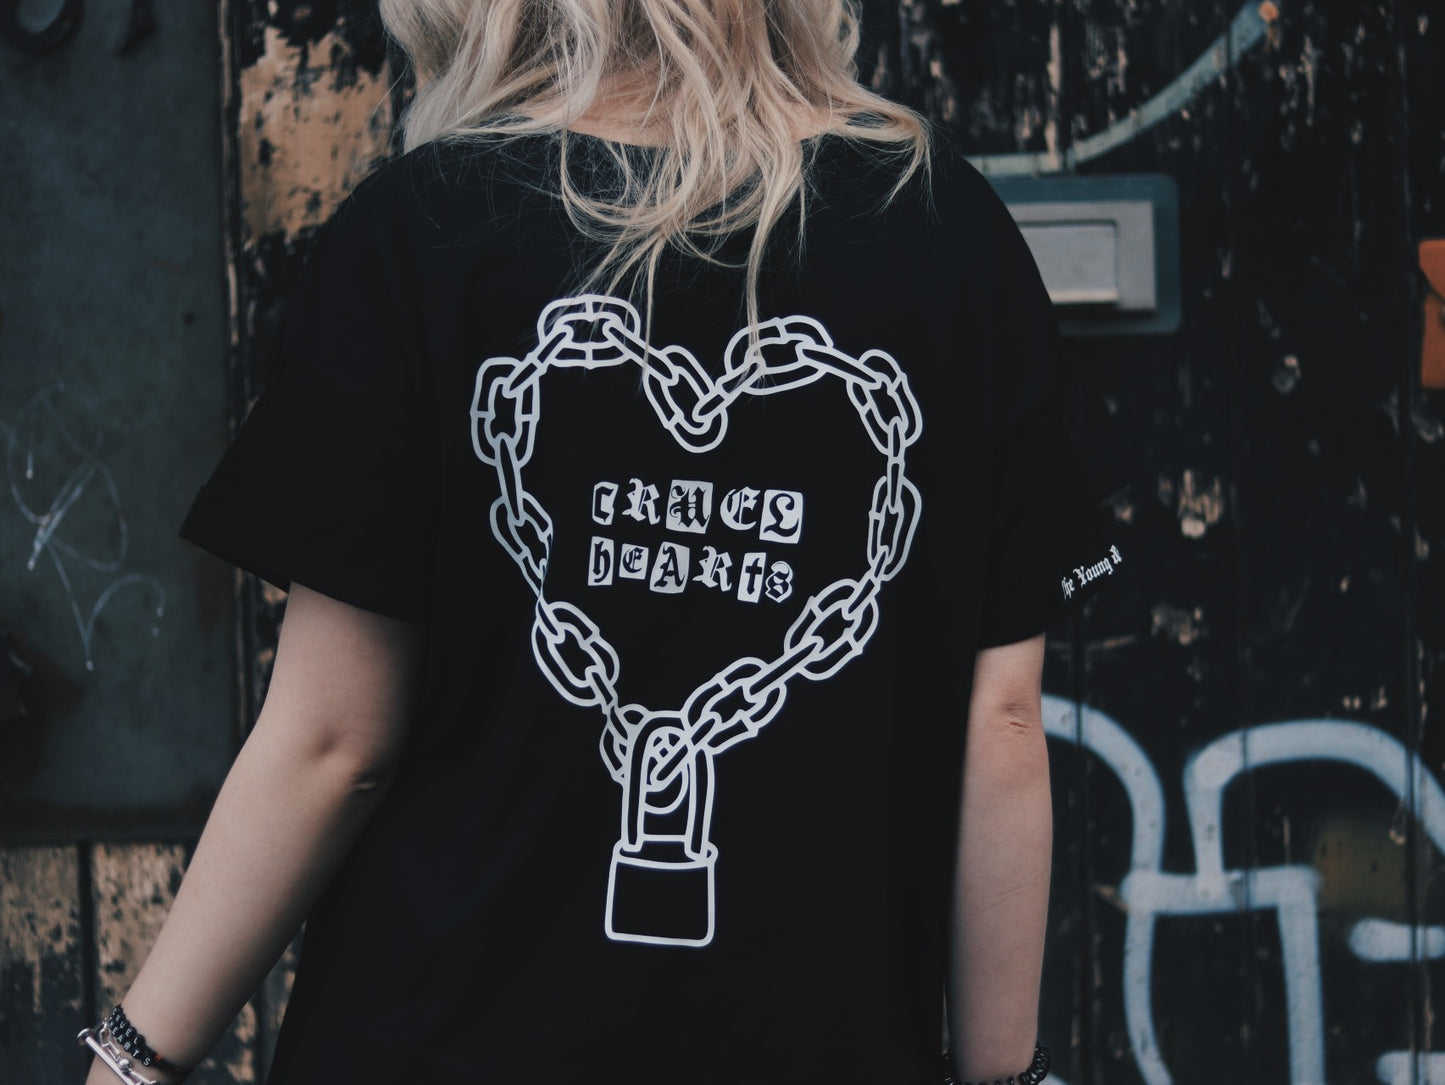 Chained Heart - T-Shirt